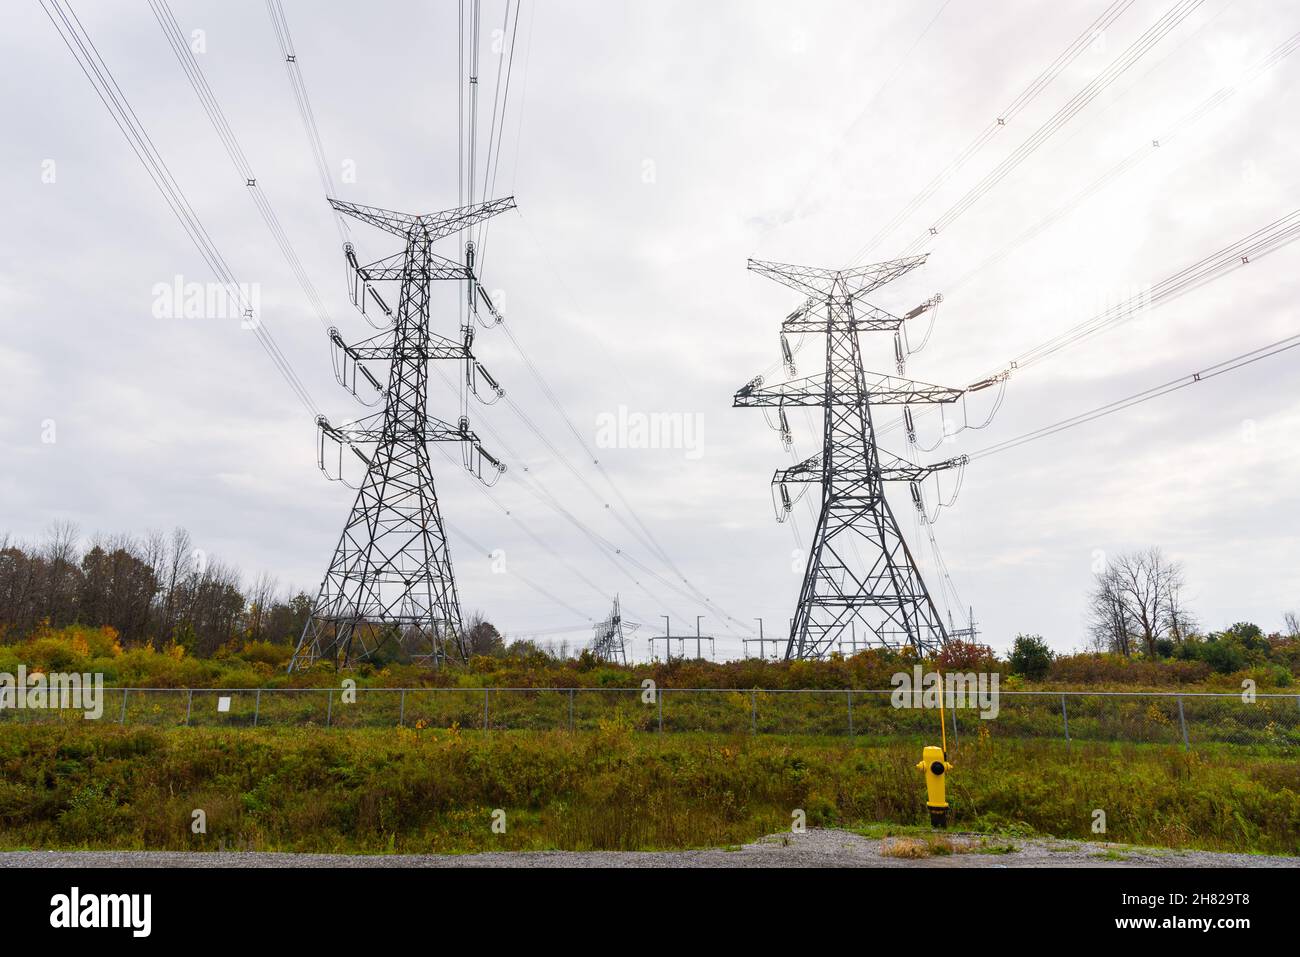 Tall high voltage electricity pylons in the countryside on a overcast autumn day Stock Photo